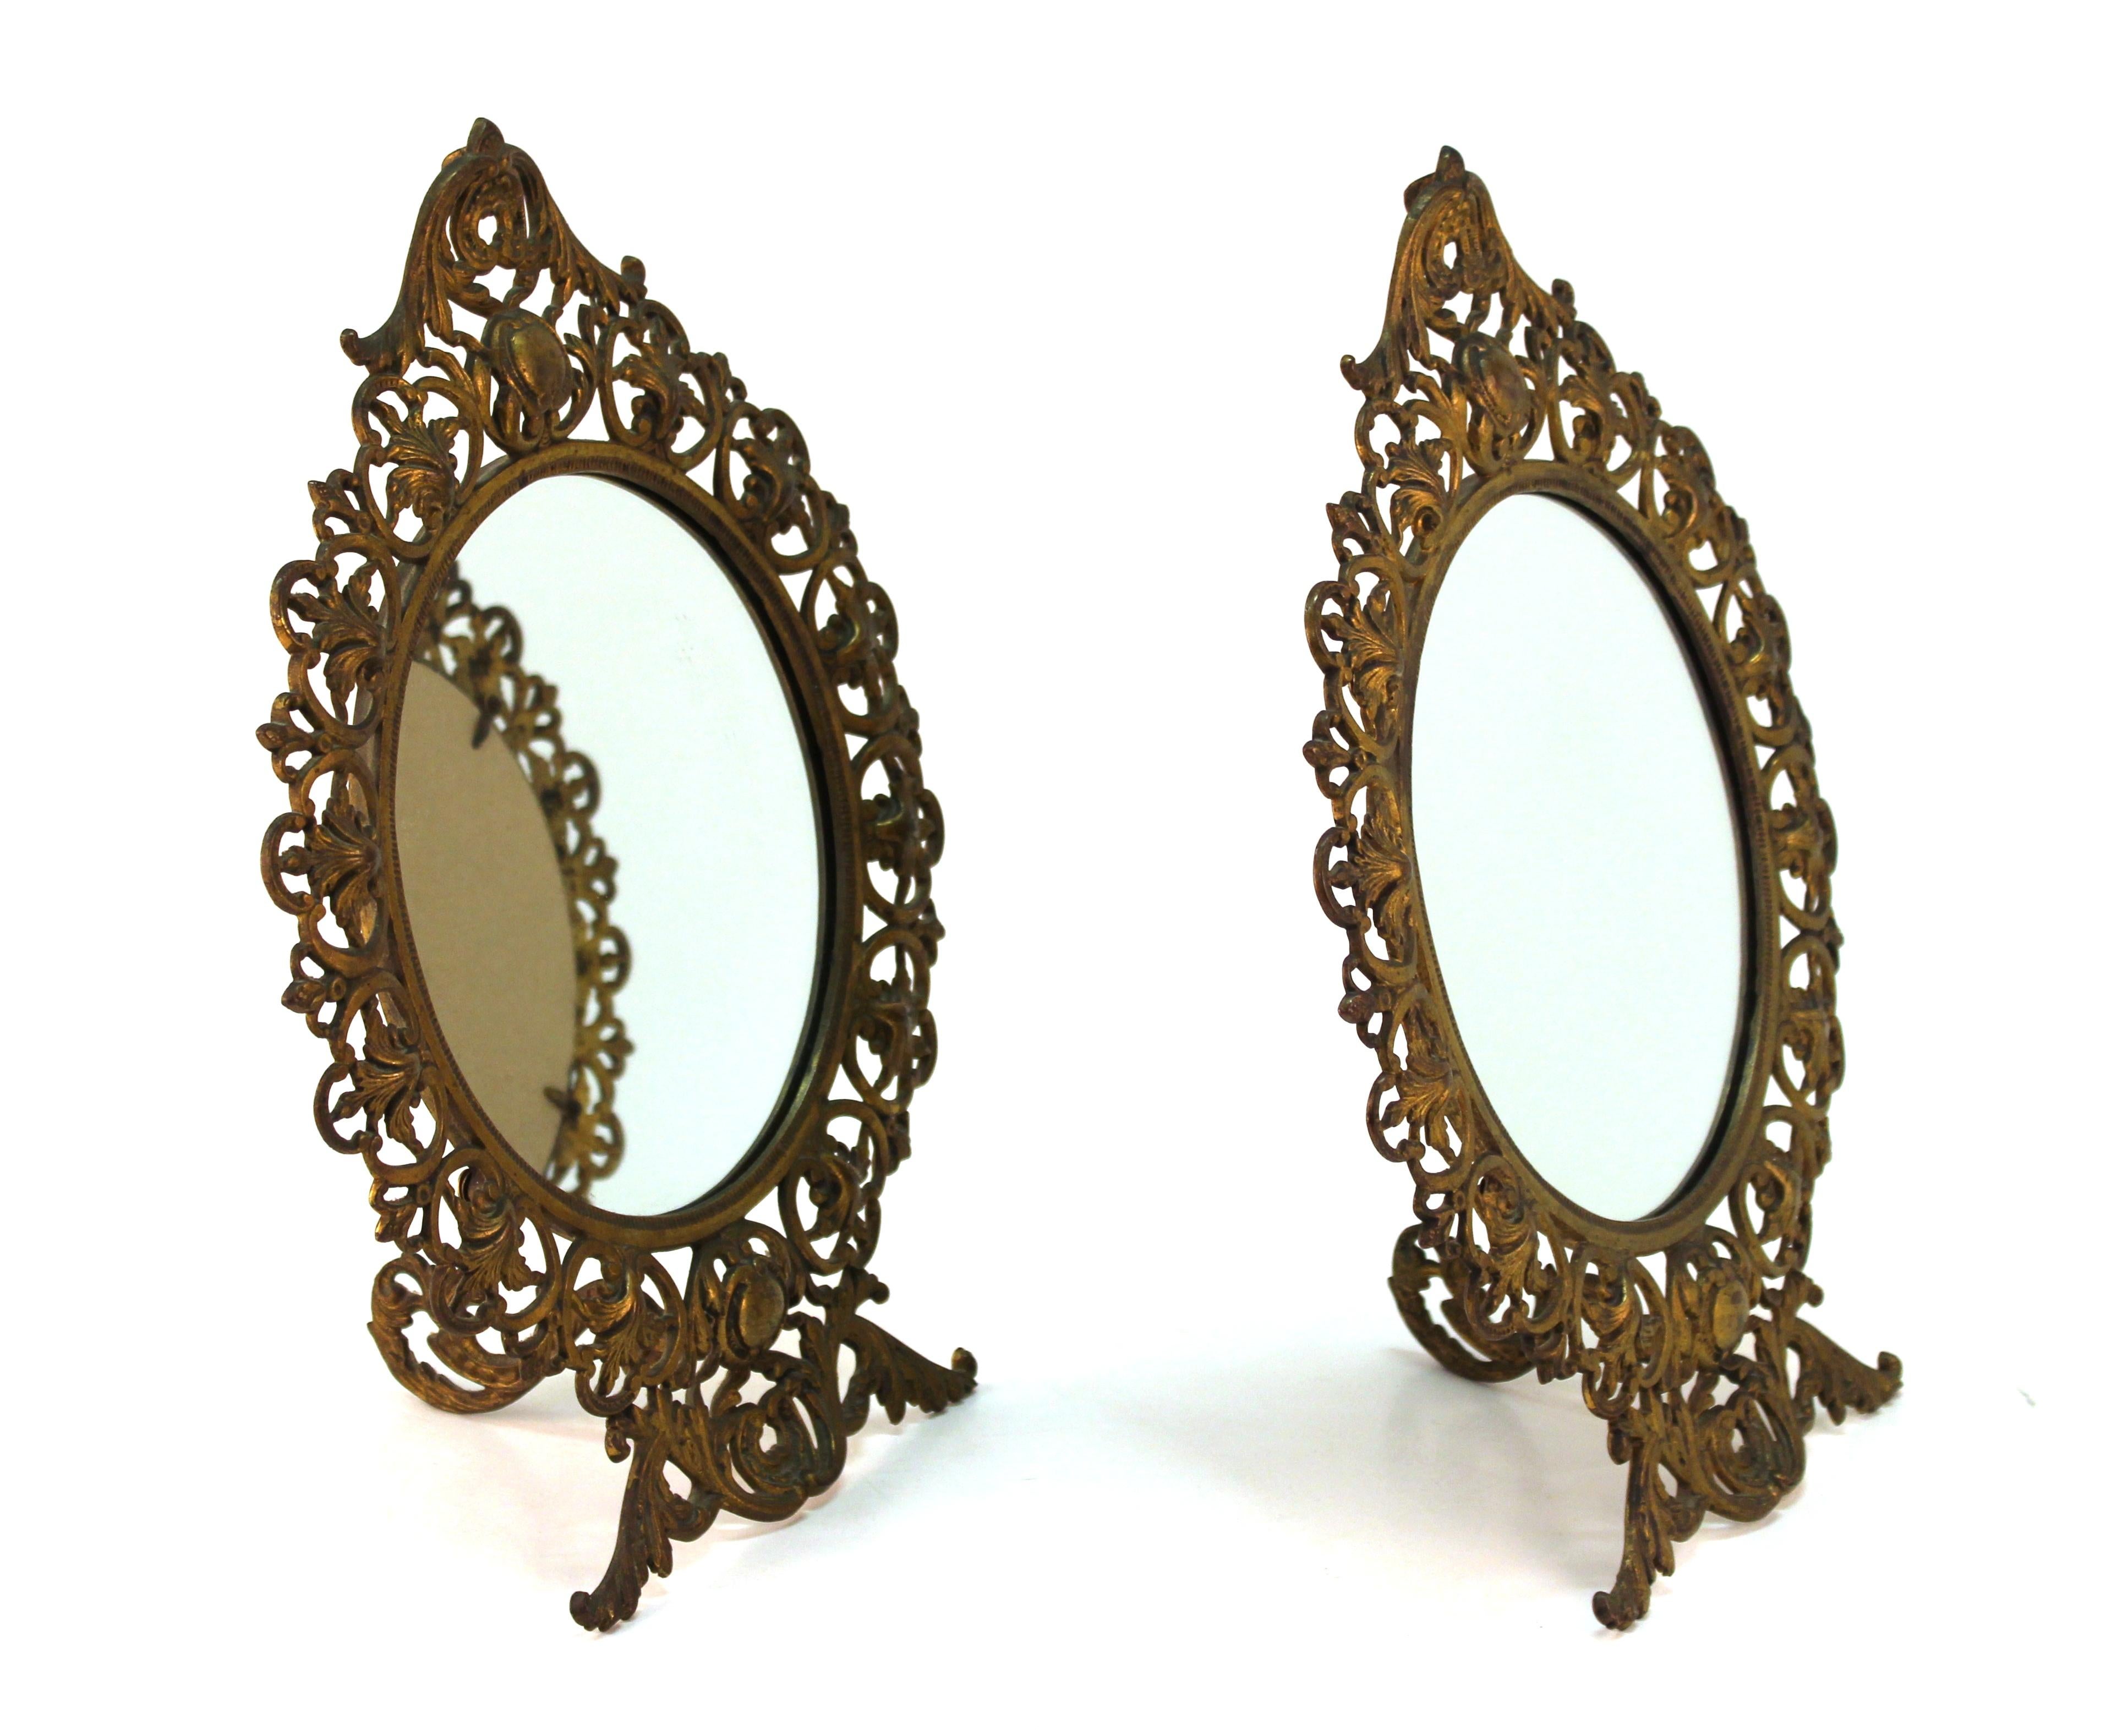 Pair of American Victorian round table mirrors set in elaborate gilt metal frames. The pair dates from the 1890s and is in excellent vintage condition.